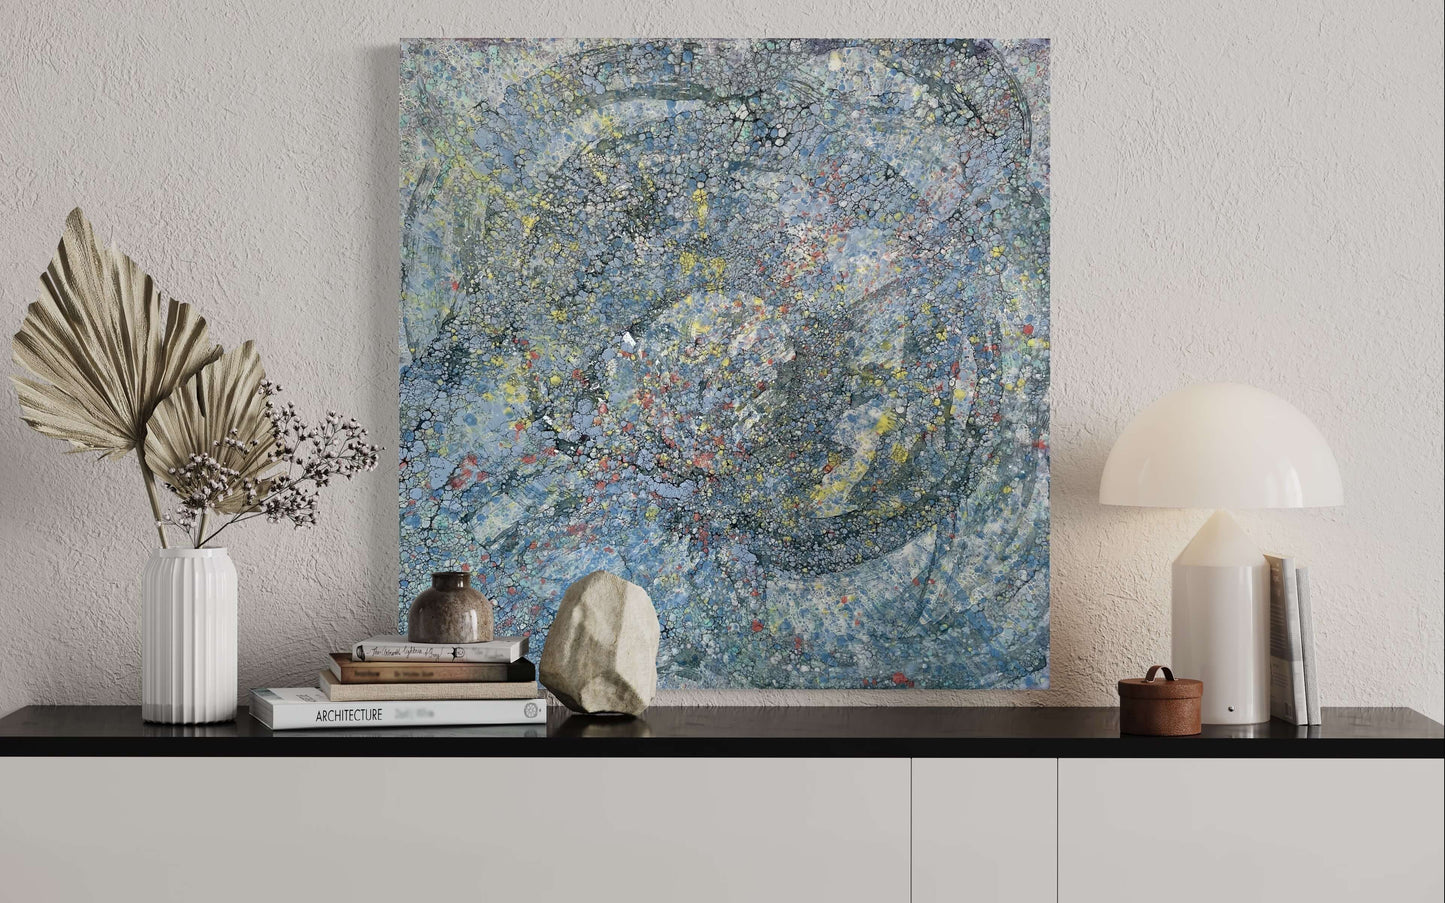 In situ.This piece has a very uplifting energy with its variations of blues, greys and specks of yellow and orange. it is a textured painting, when you run your fingers over it, you will feel ripples of wax. The droplets of orange wax signifies Monarch butterflies taking to the sky.